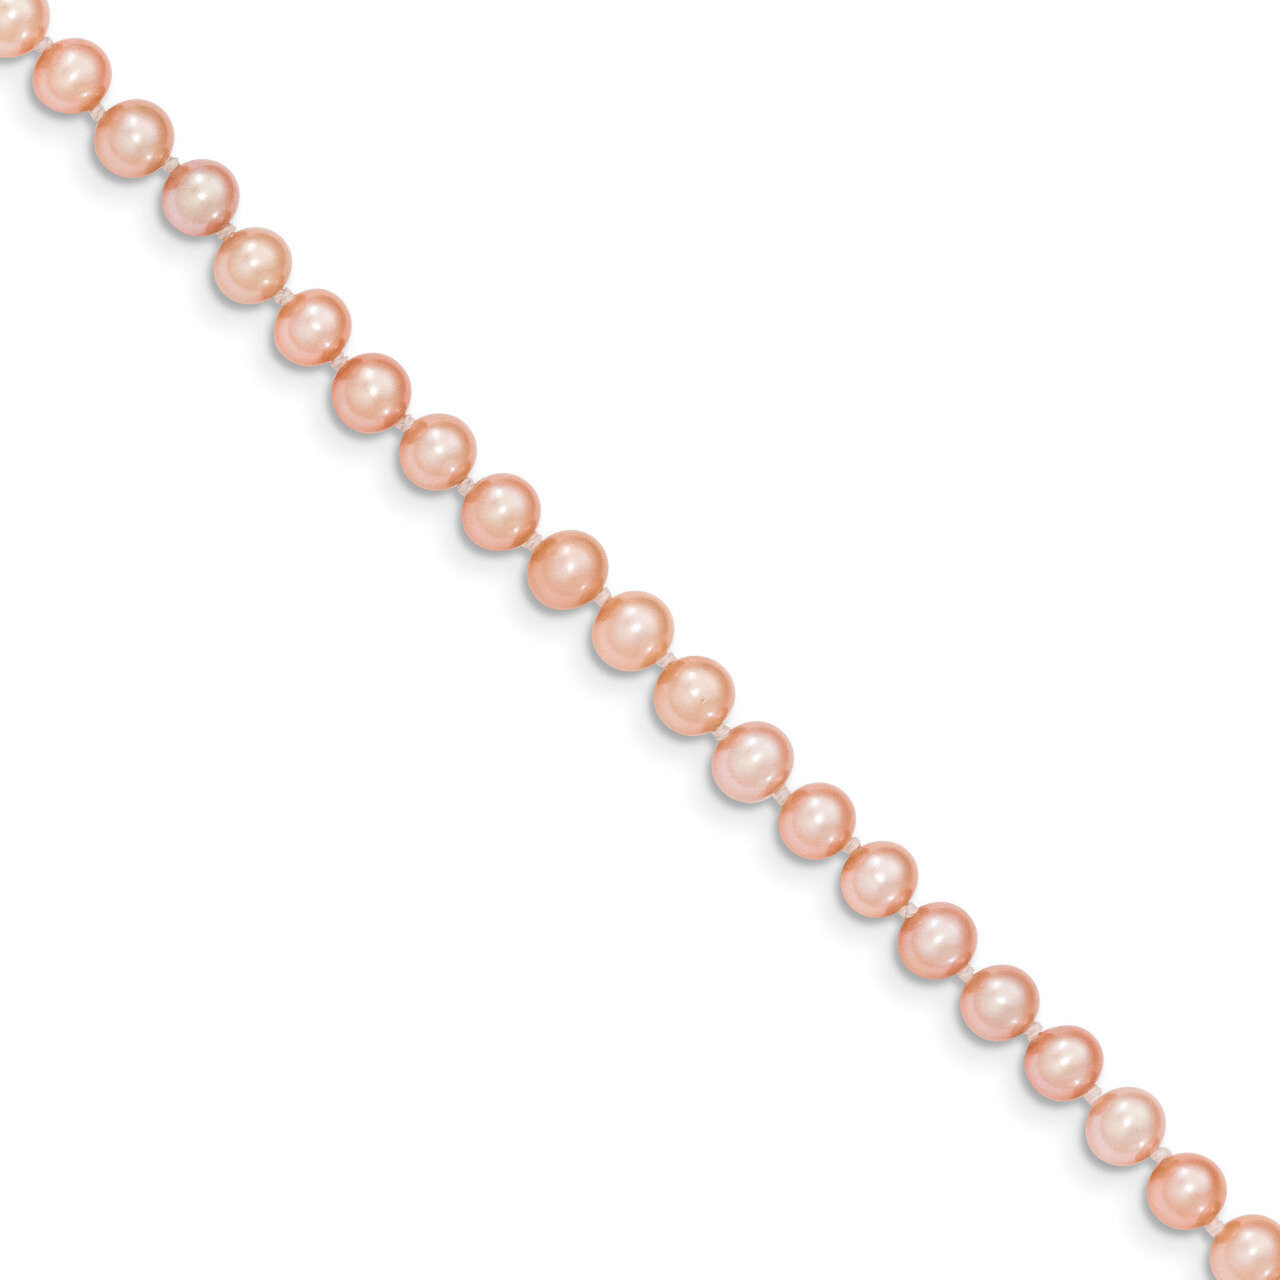 4-5mm Pink Cultured Near Round Pearl Necklace 20 Inch 14k Gold PPN040-20